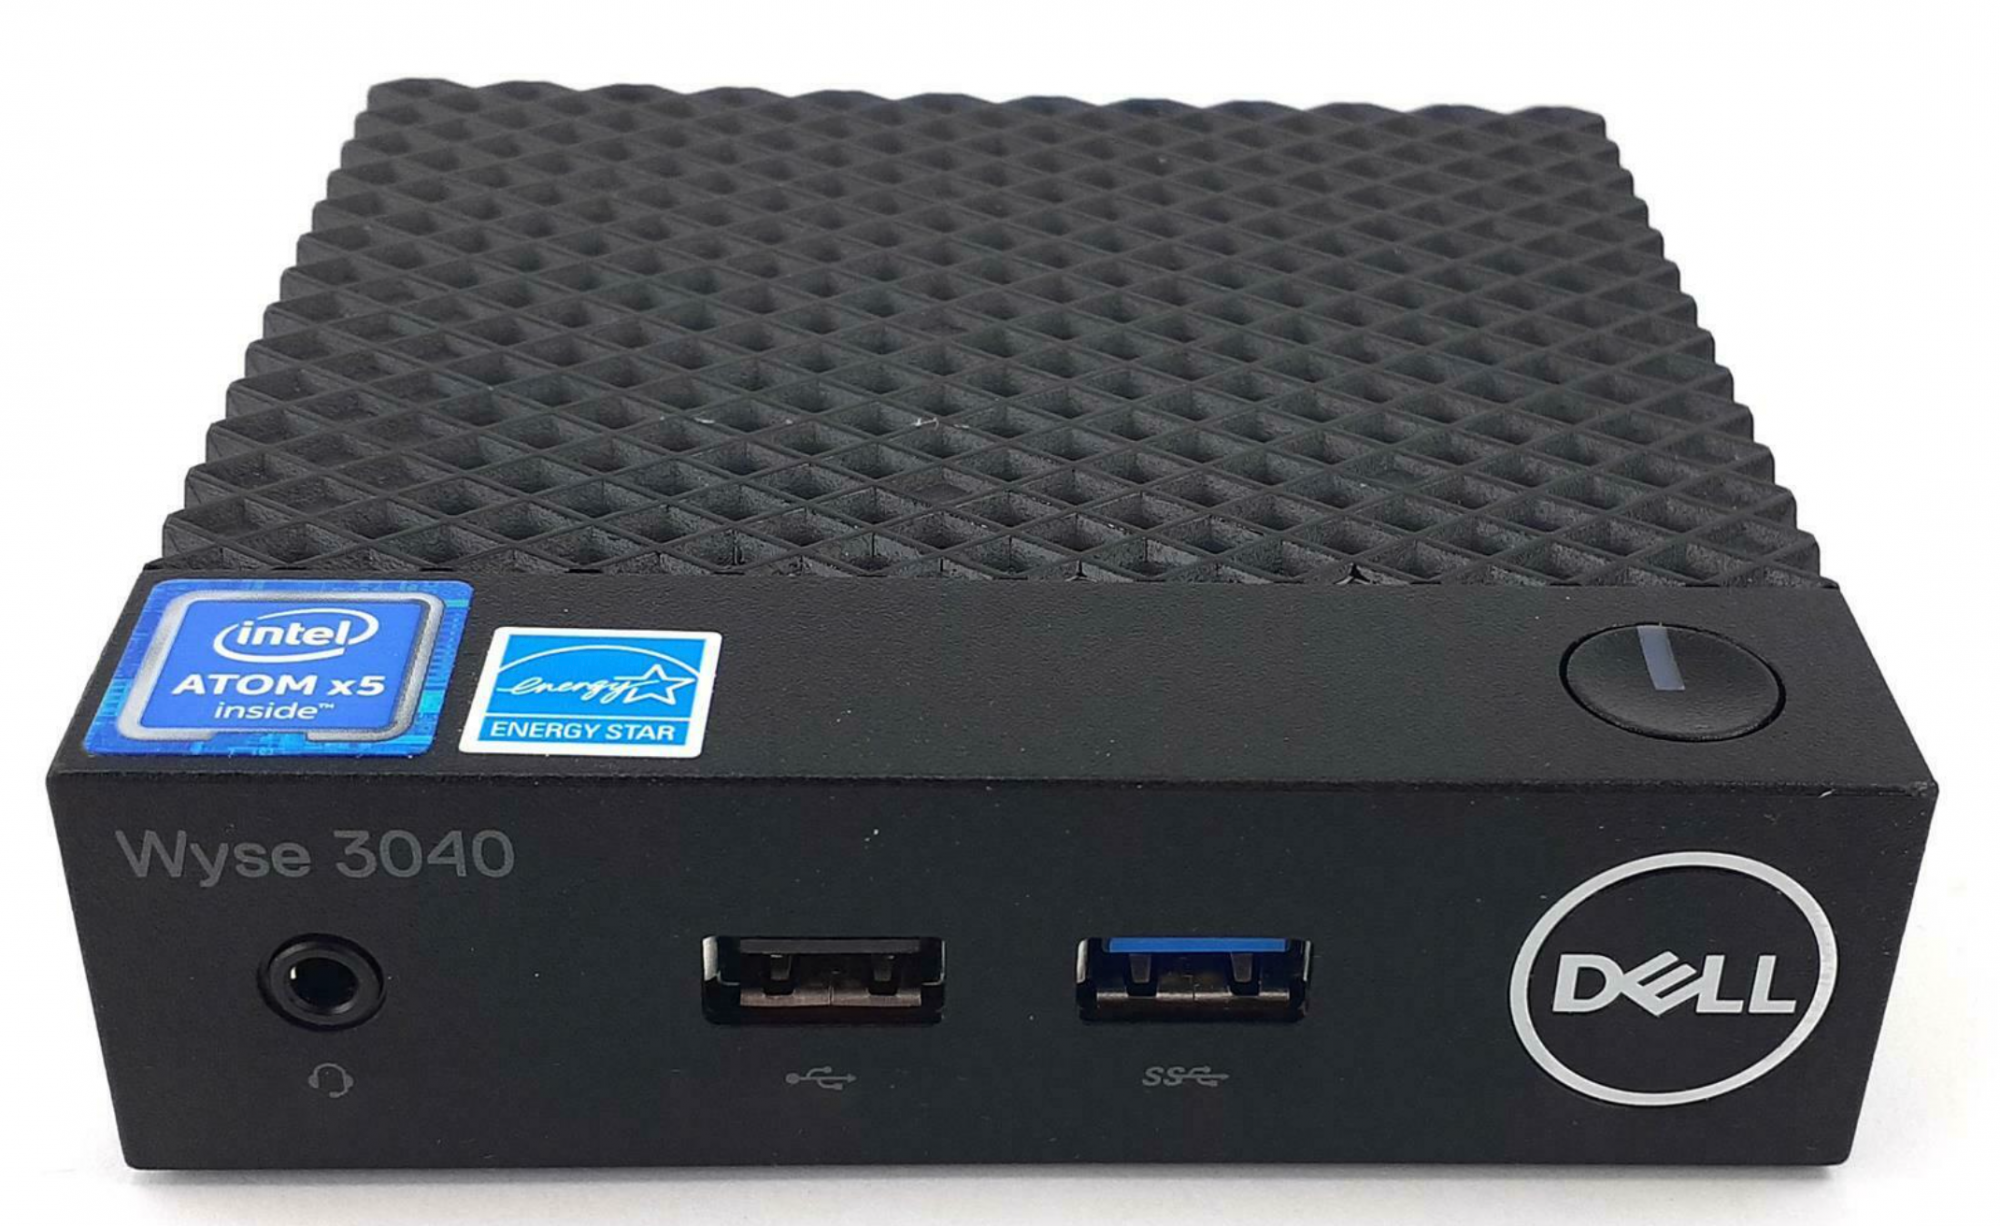 Dell Wyse 3040. Dell Wyse 3040 thin client. Тонкий клиент dell Wyse. Dell Wyse неттоп. Tc client